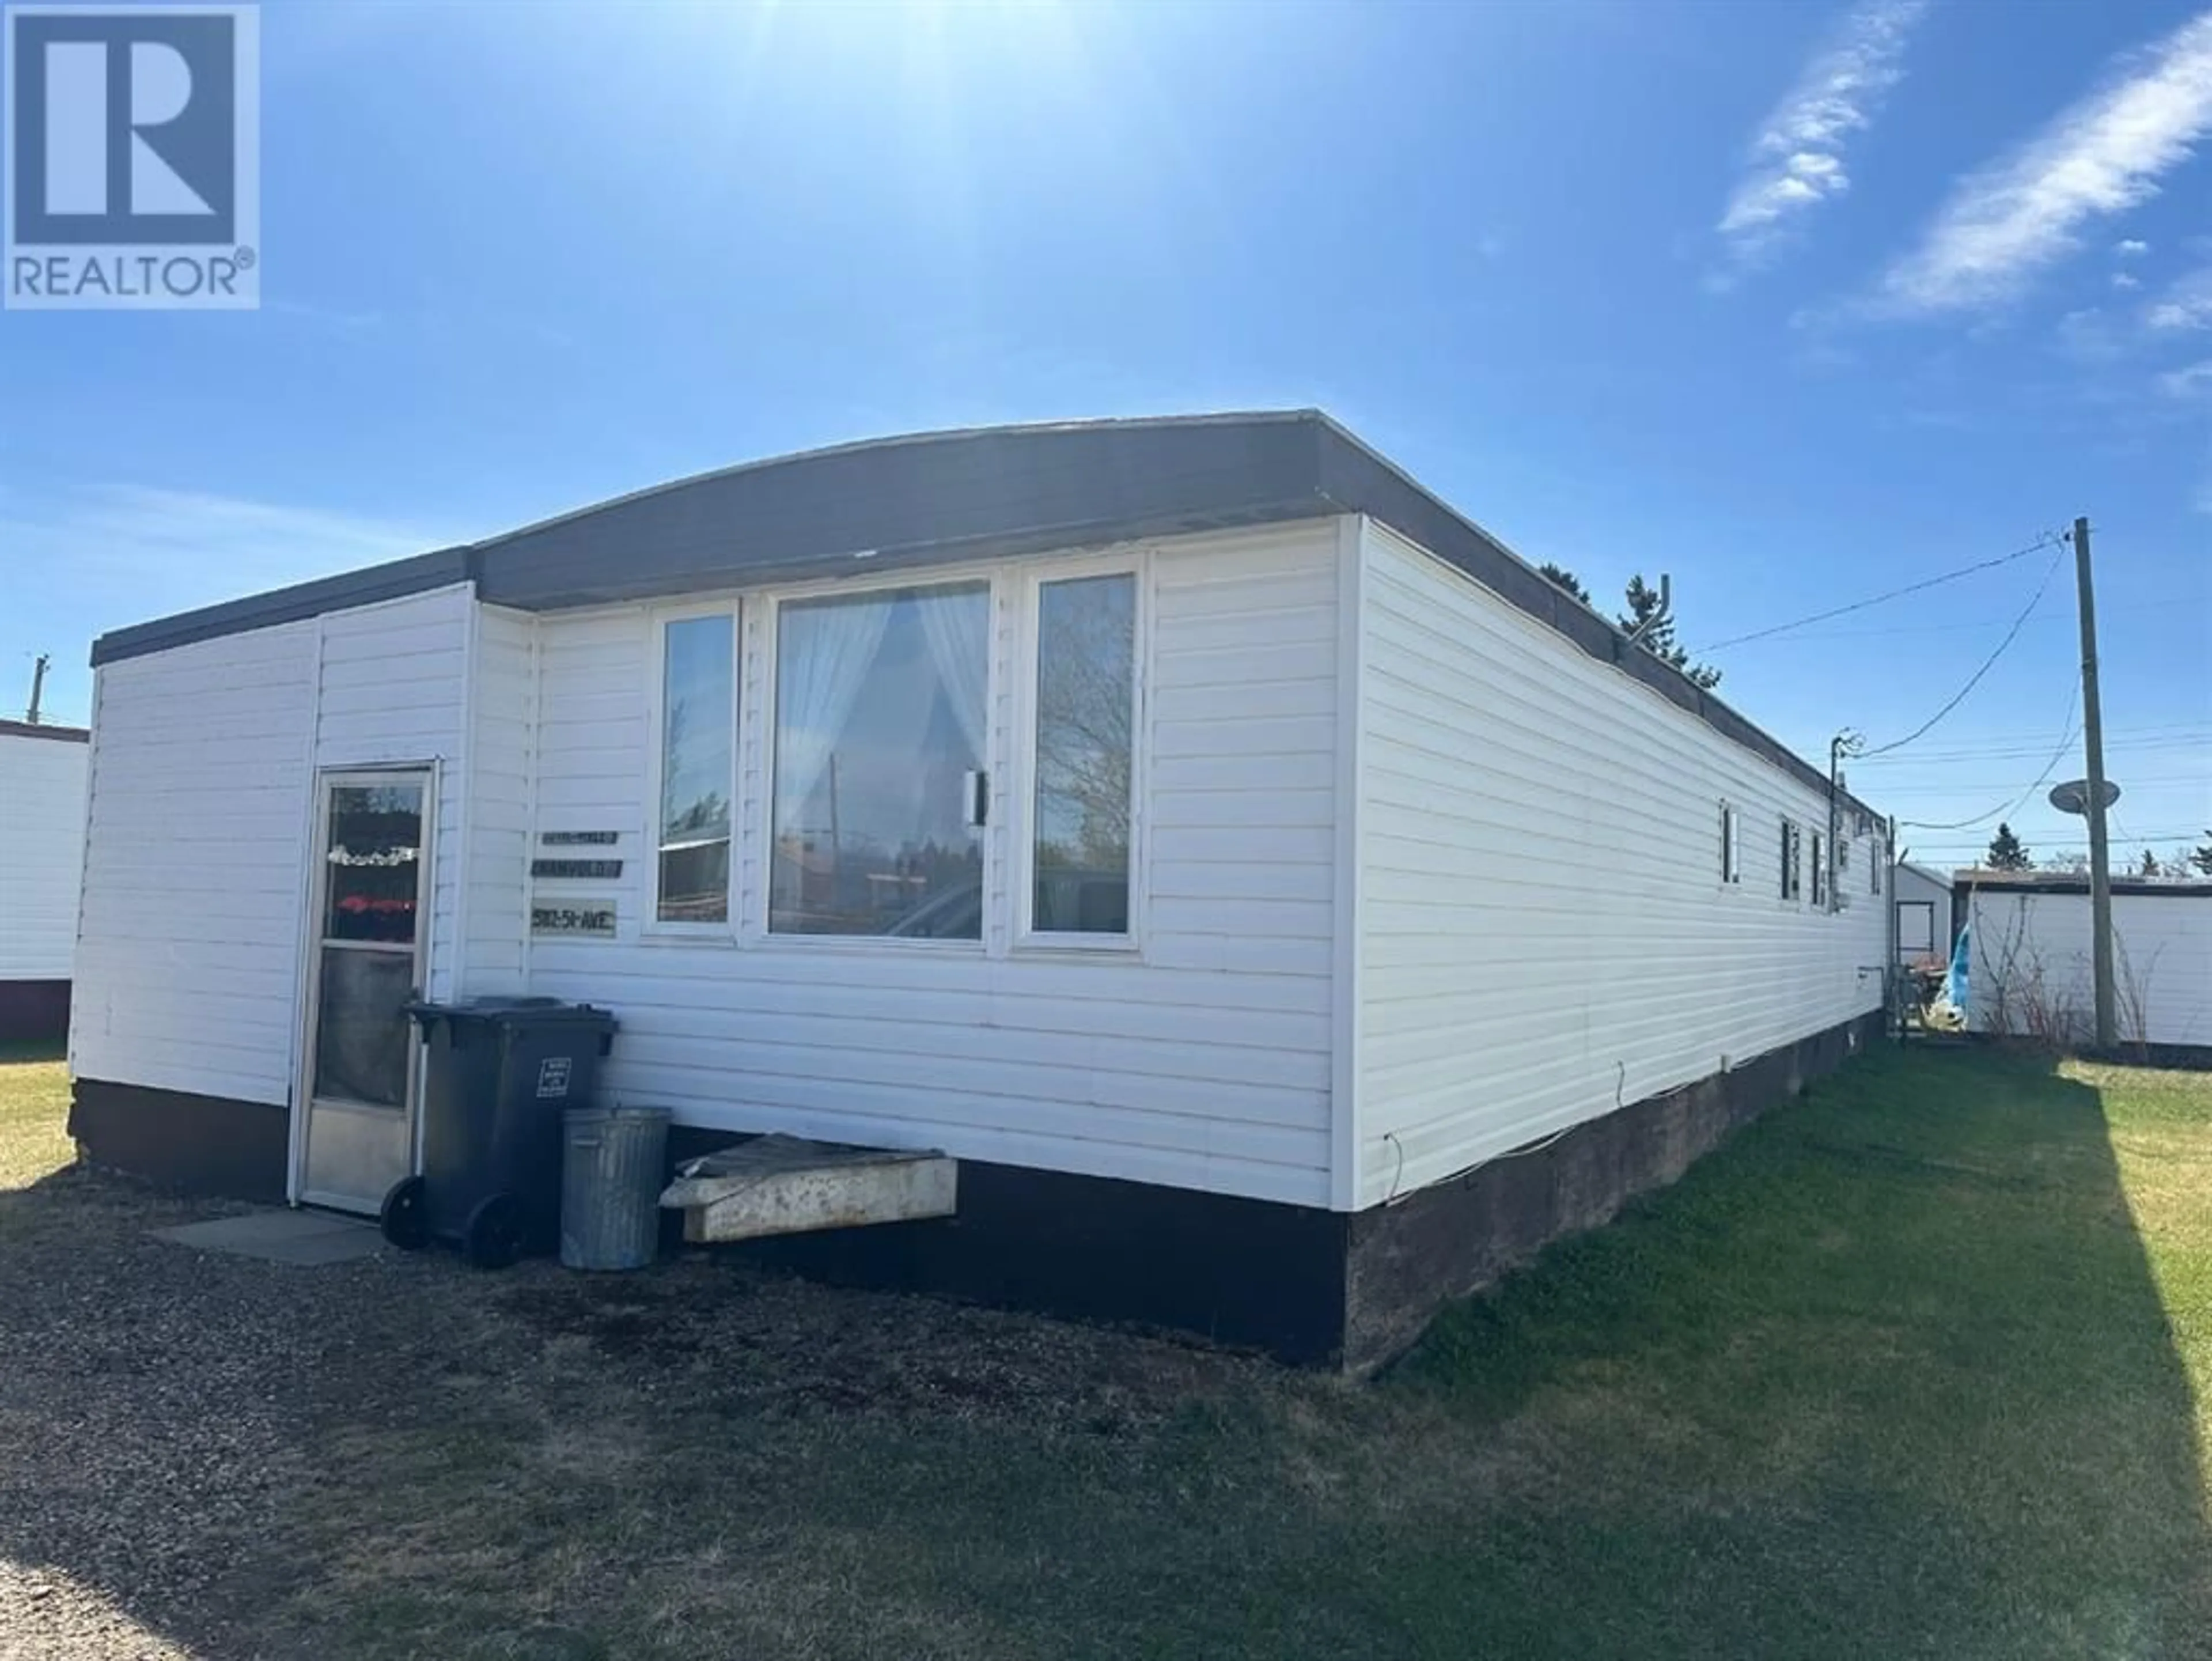 Home with vinyl exterior material for 5117 51 Avenue, Berwyn Alberta T0H0E0